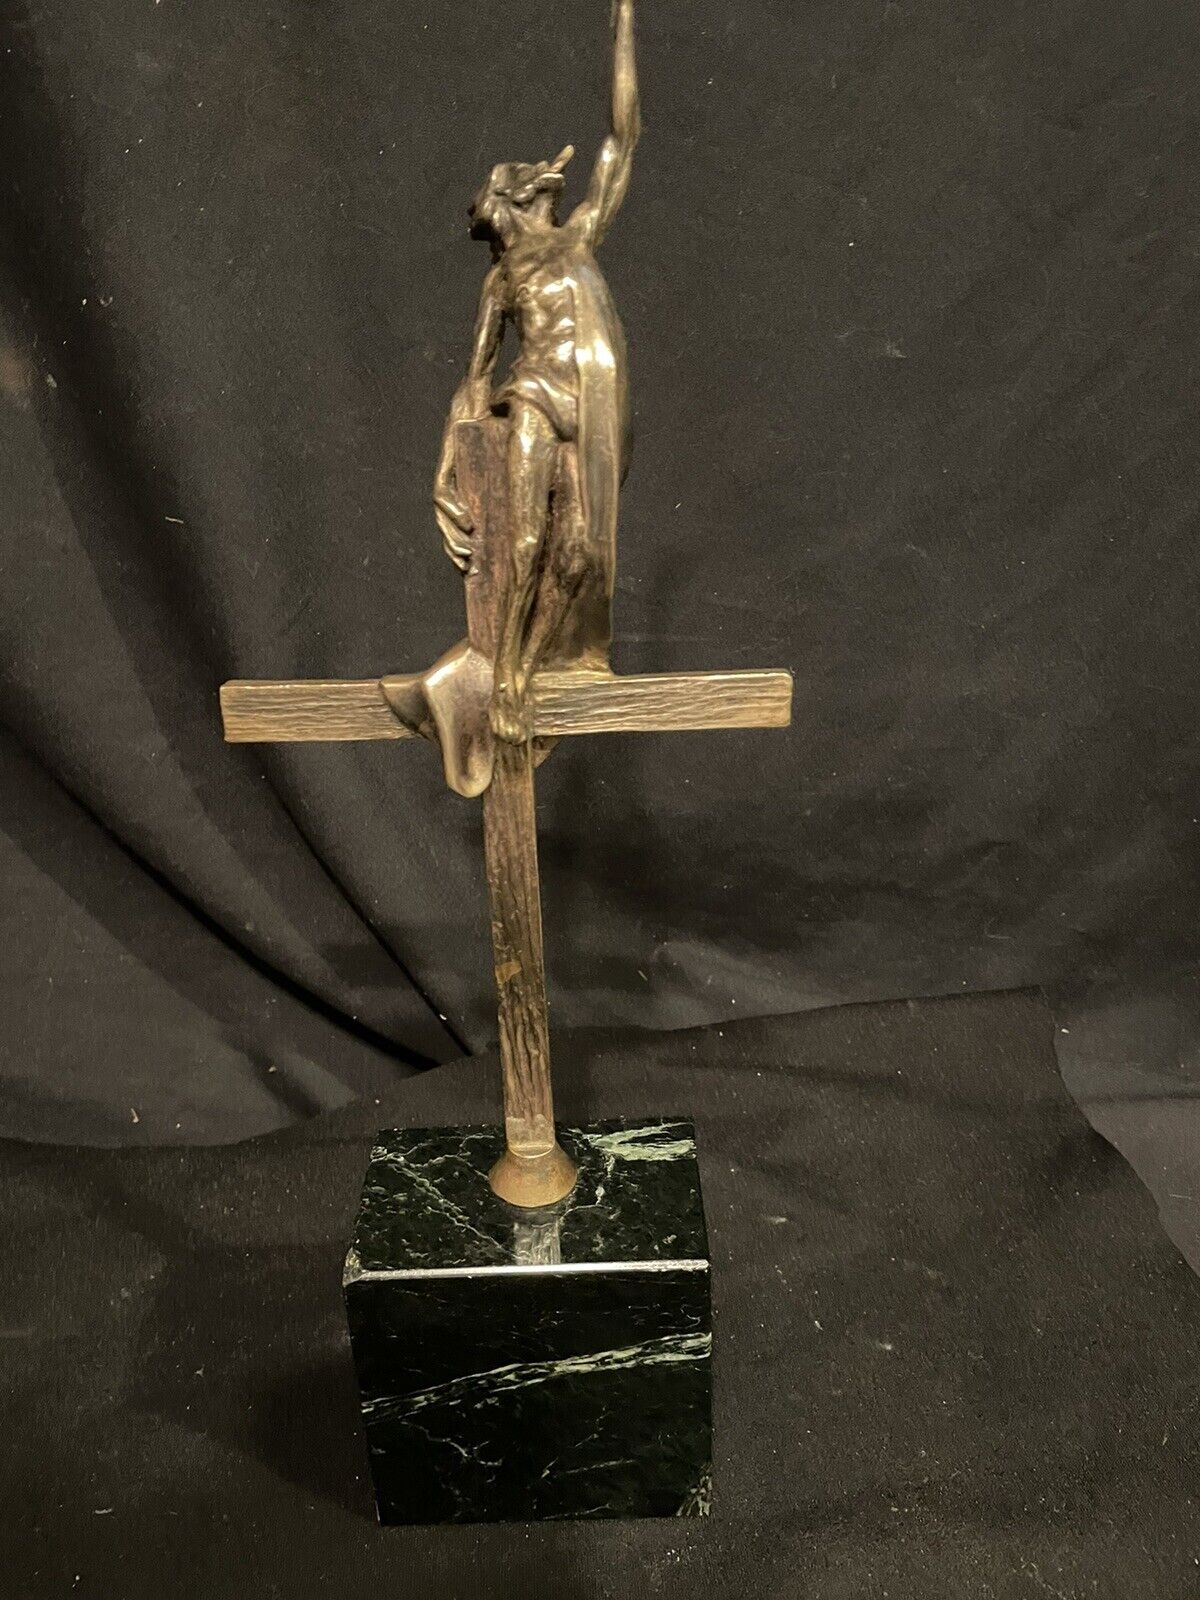 VERY RARE BRONZE JESUS ASCENDING TO HEAVEN FROM CROSS SCULPTURE (Marble Base)17”